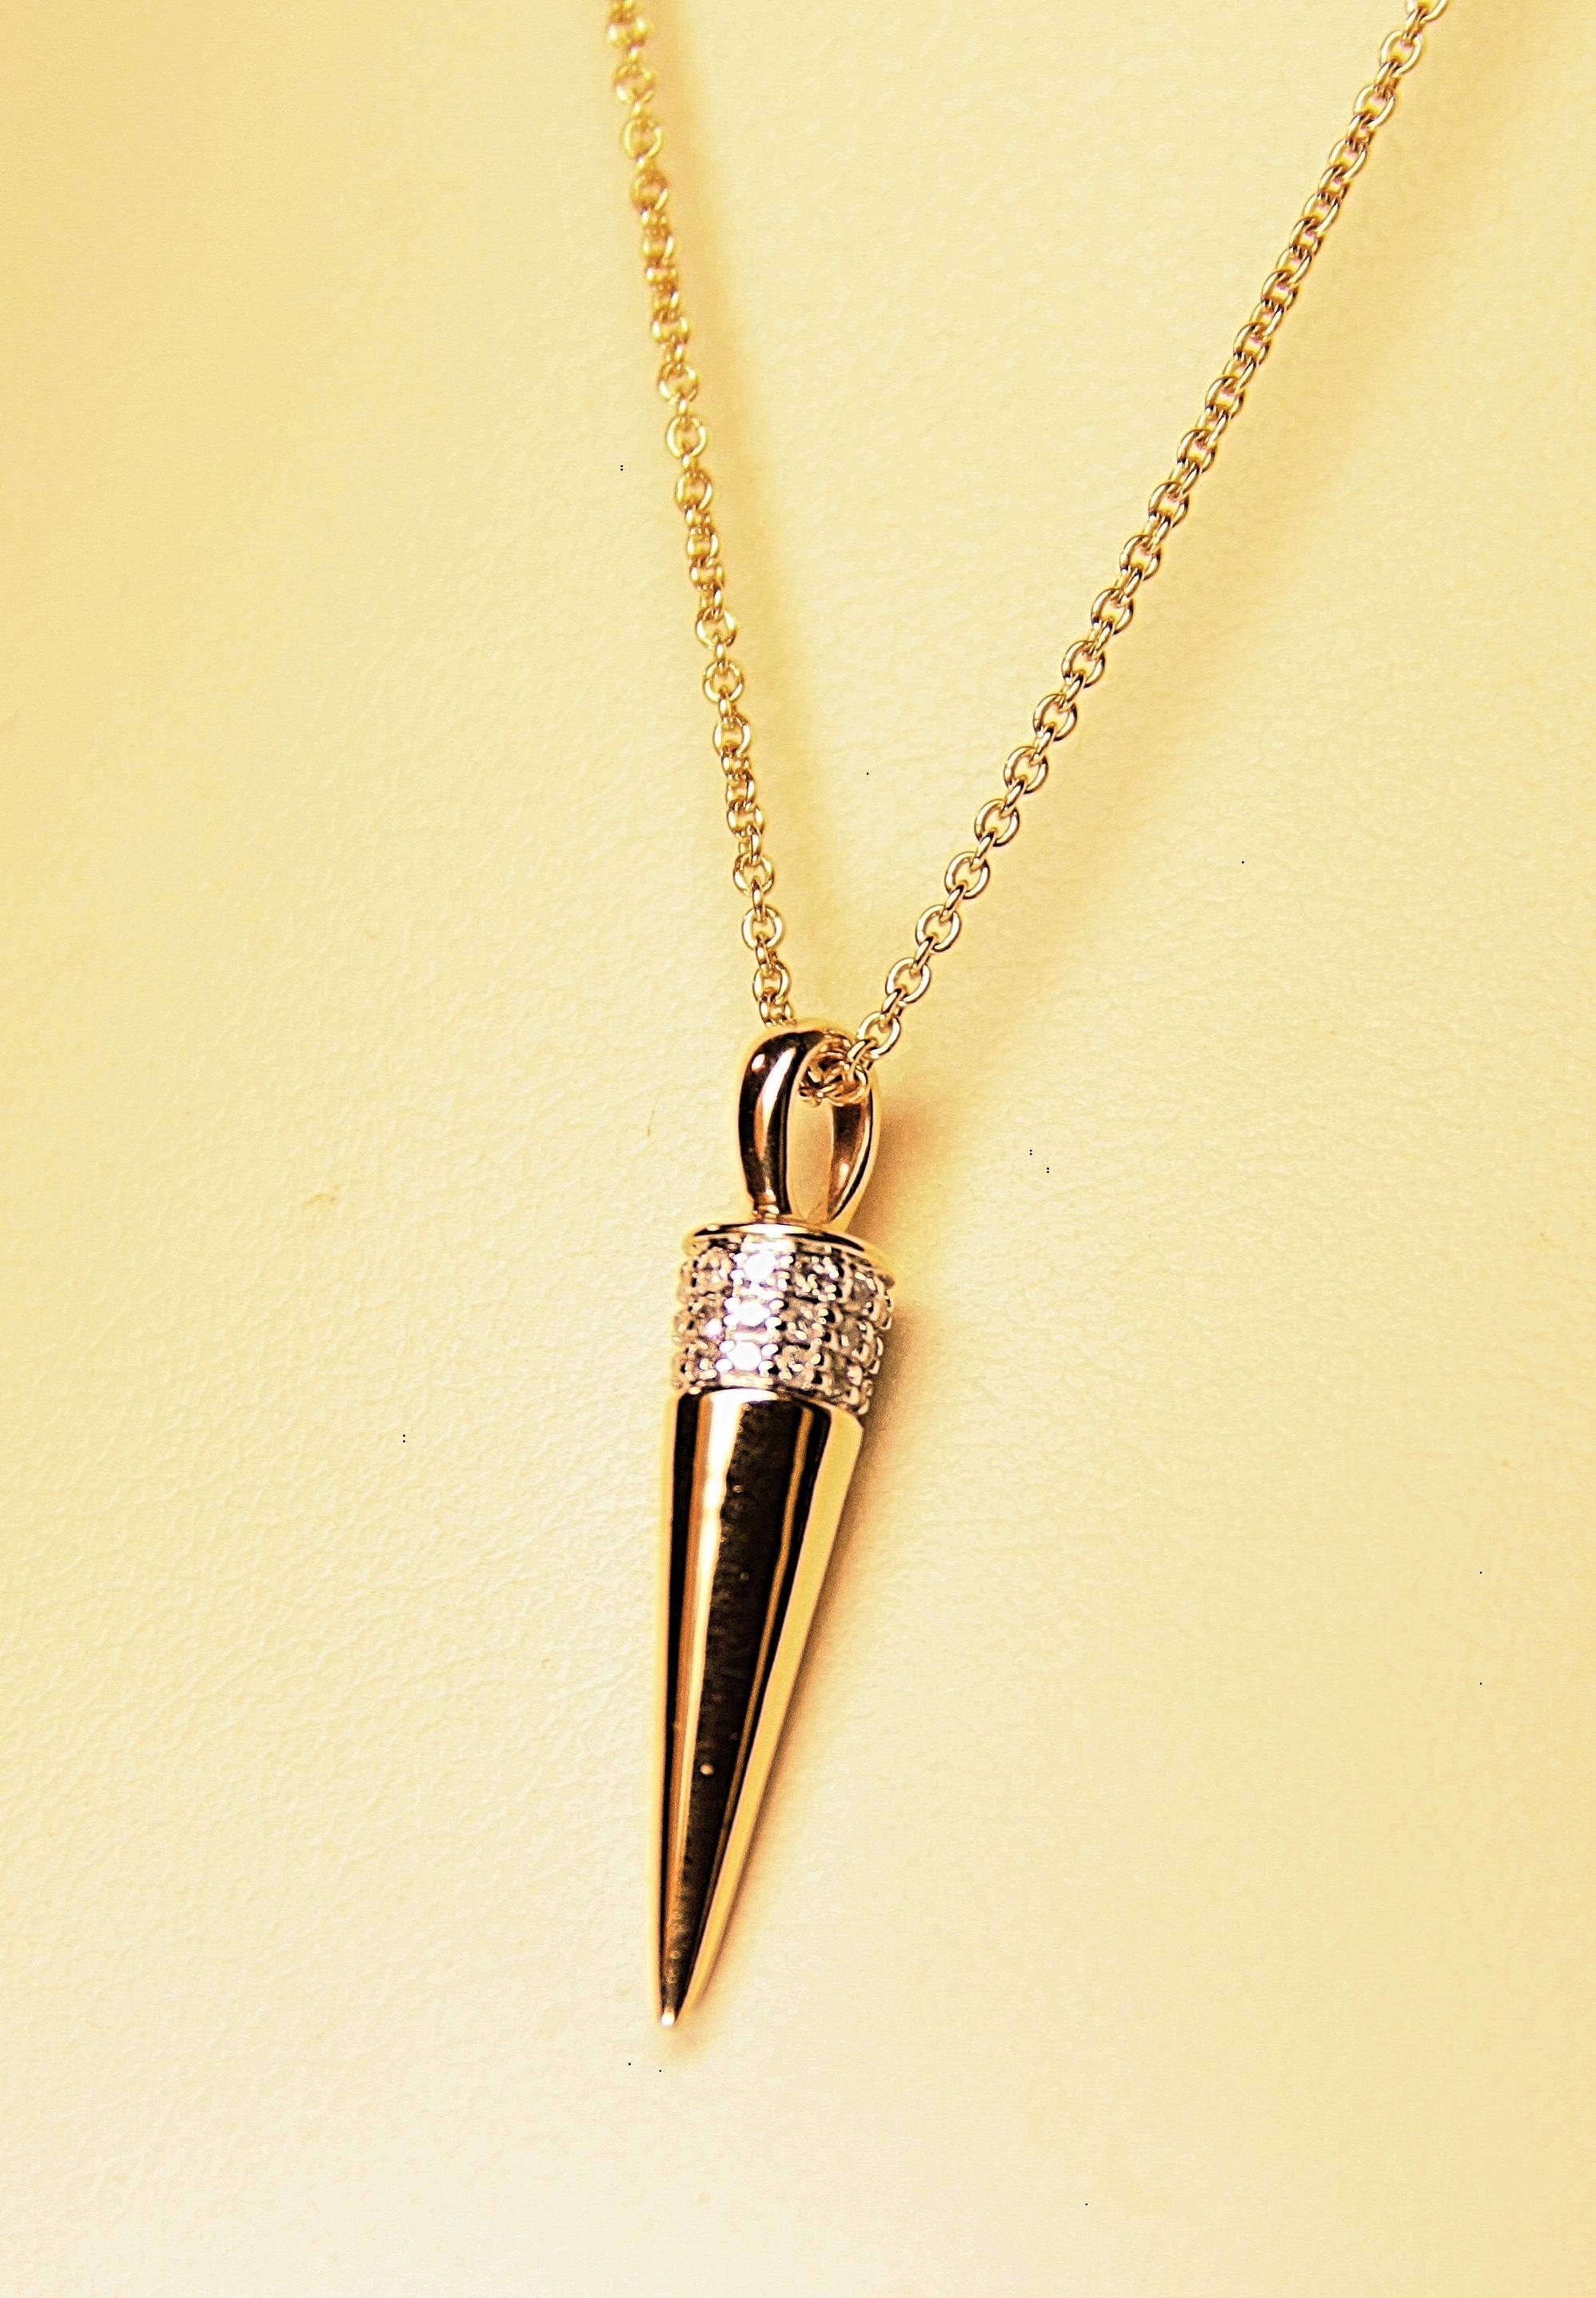 A spike designed (solid gold) pendant on a 14K Yellow Gold chain.  Spike pendant is circled at the top with diamonds that weigh .20 carat total weight.  The charm pendant chain is 18 inches long and 1 mm wide. The spike is 1 inch long and 5 mm at